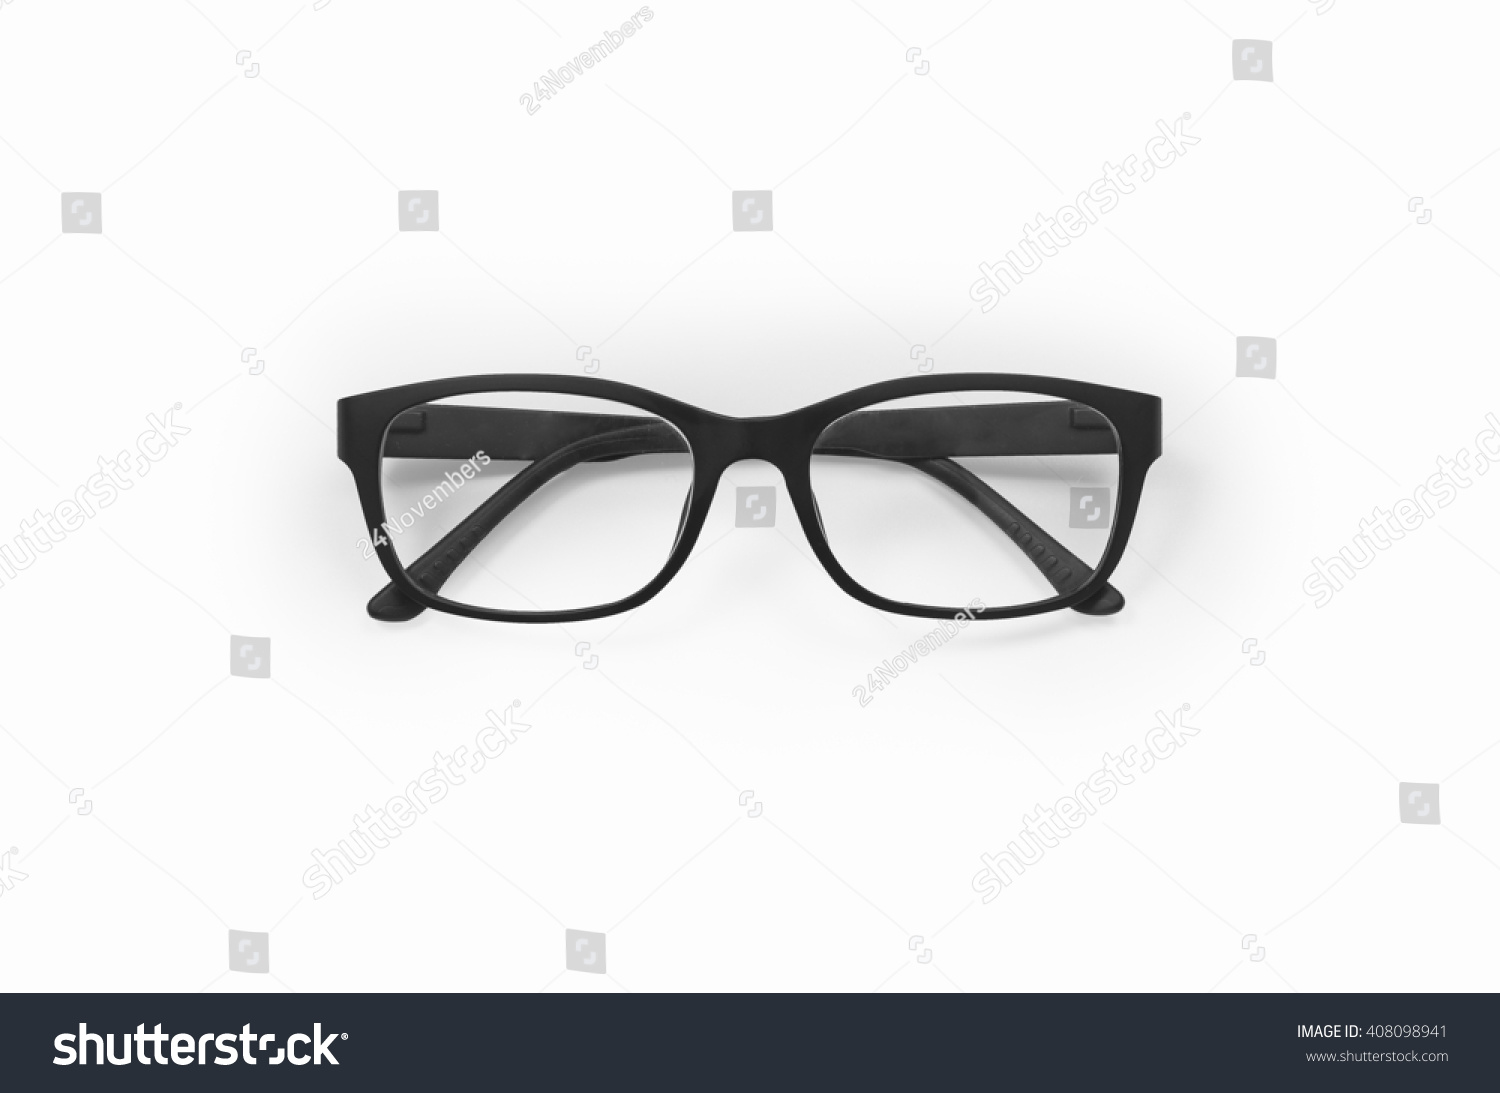 Glasses isolated on white with clipping path. #408098941